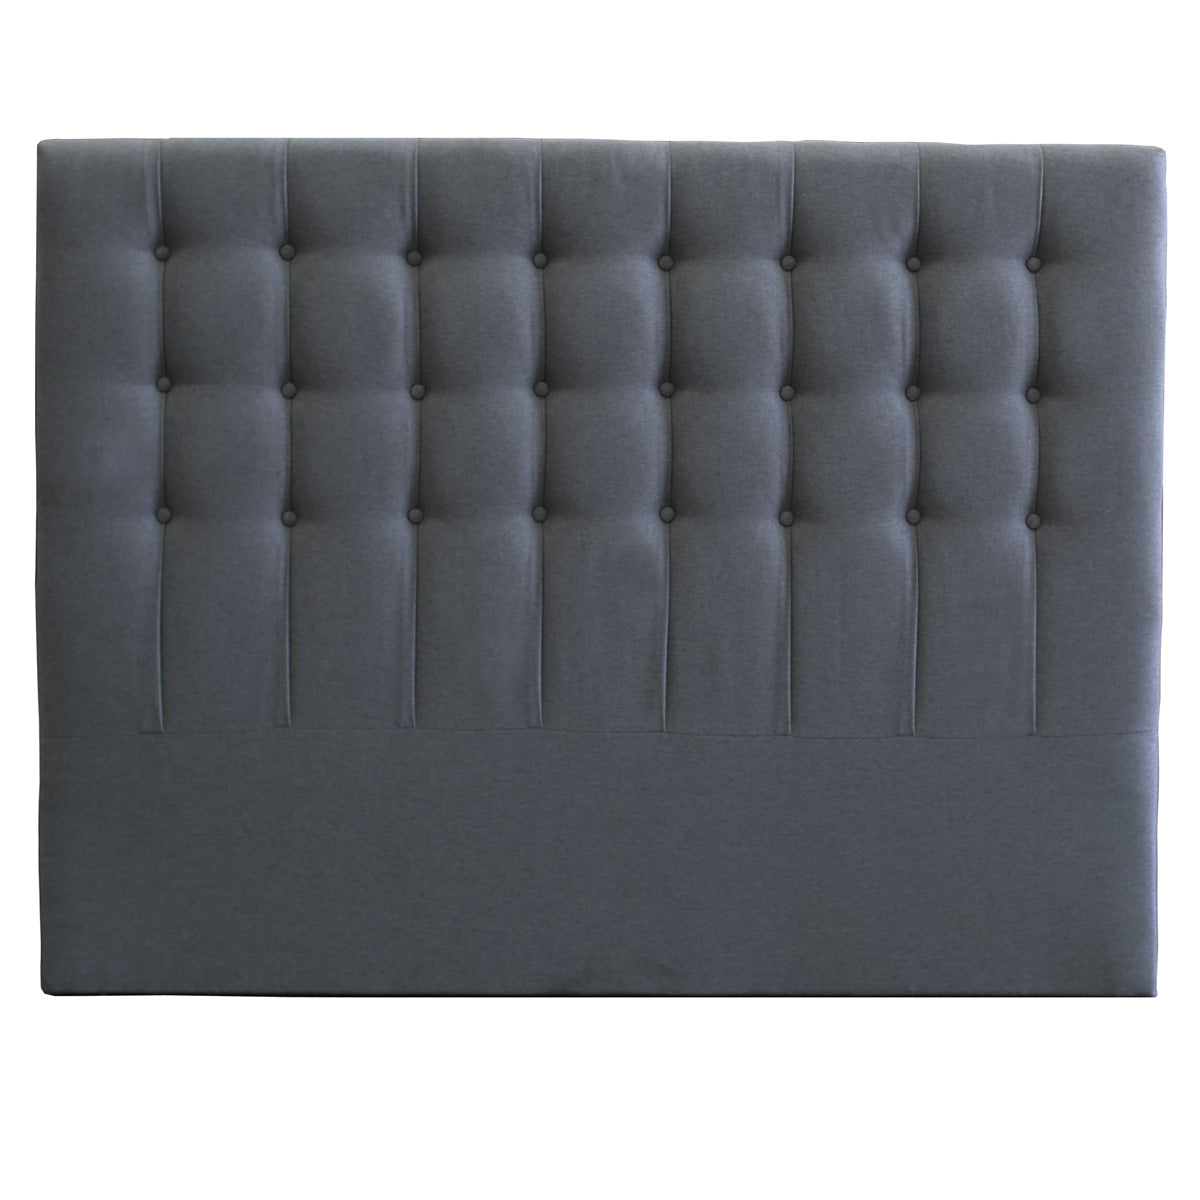 Maddison Upholstered Fabric Bedhead (Charcoal)